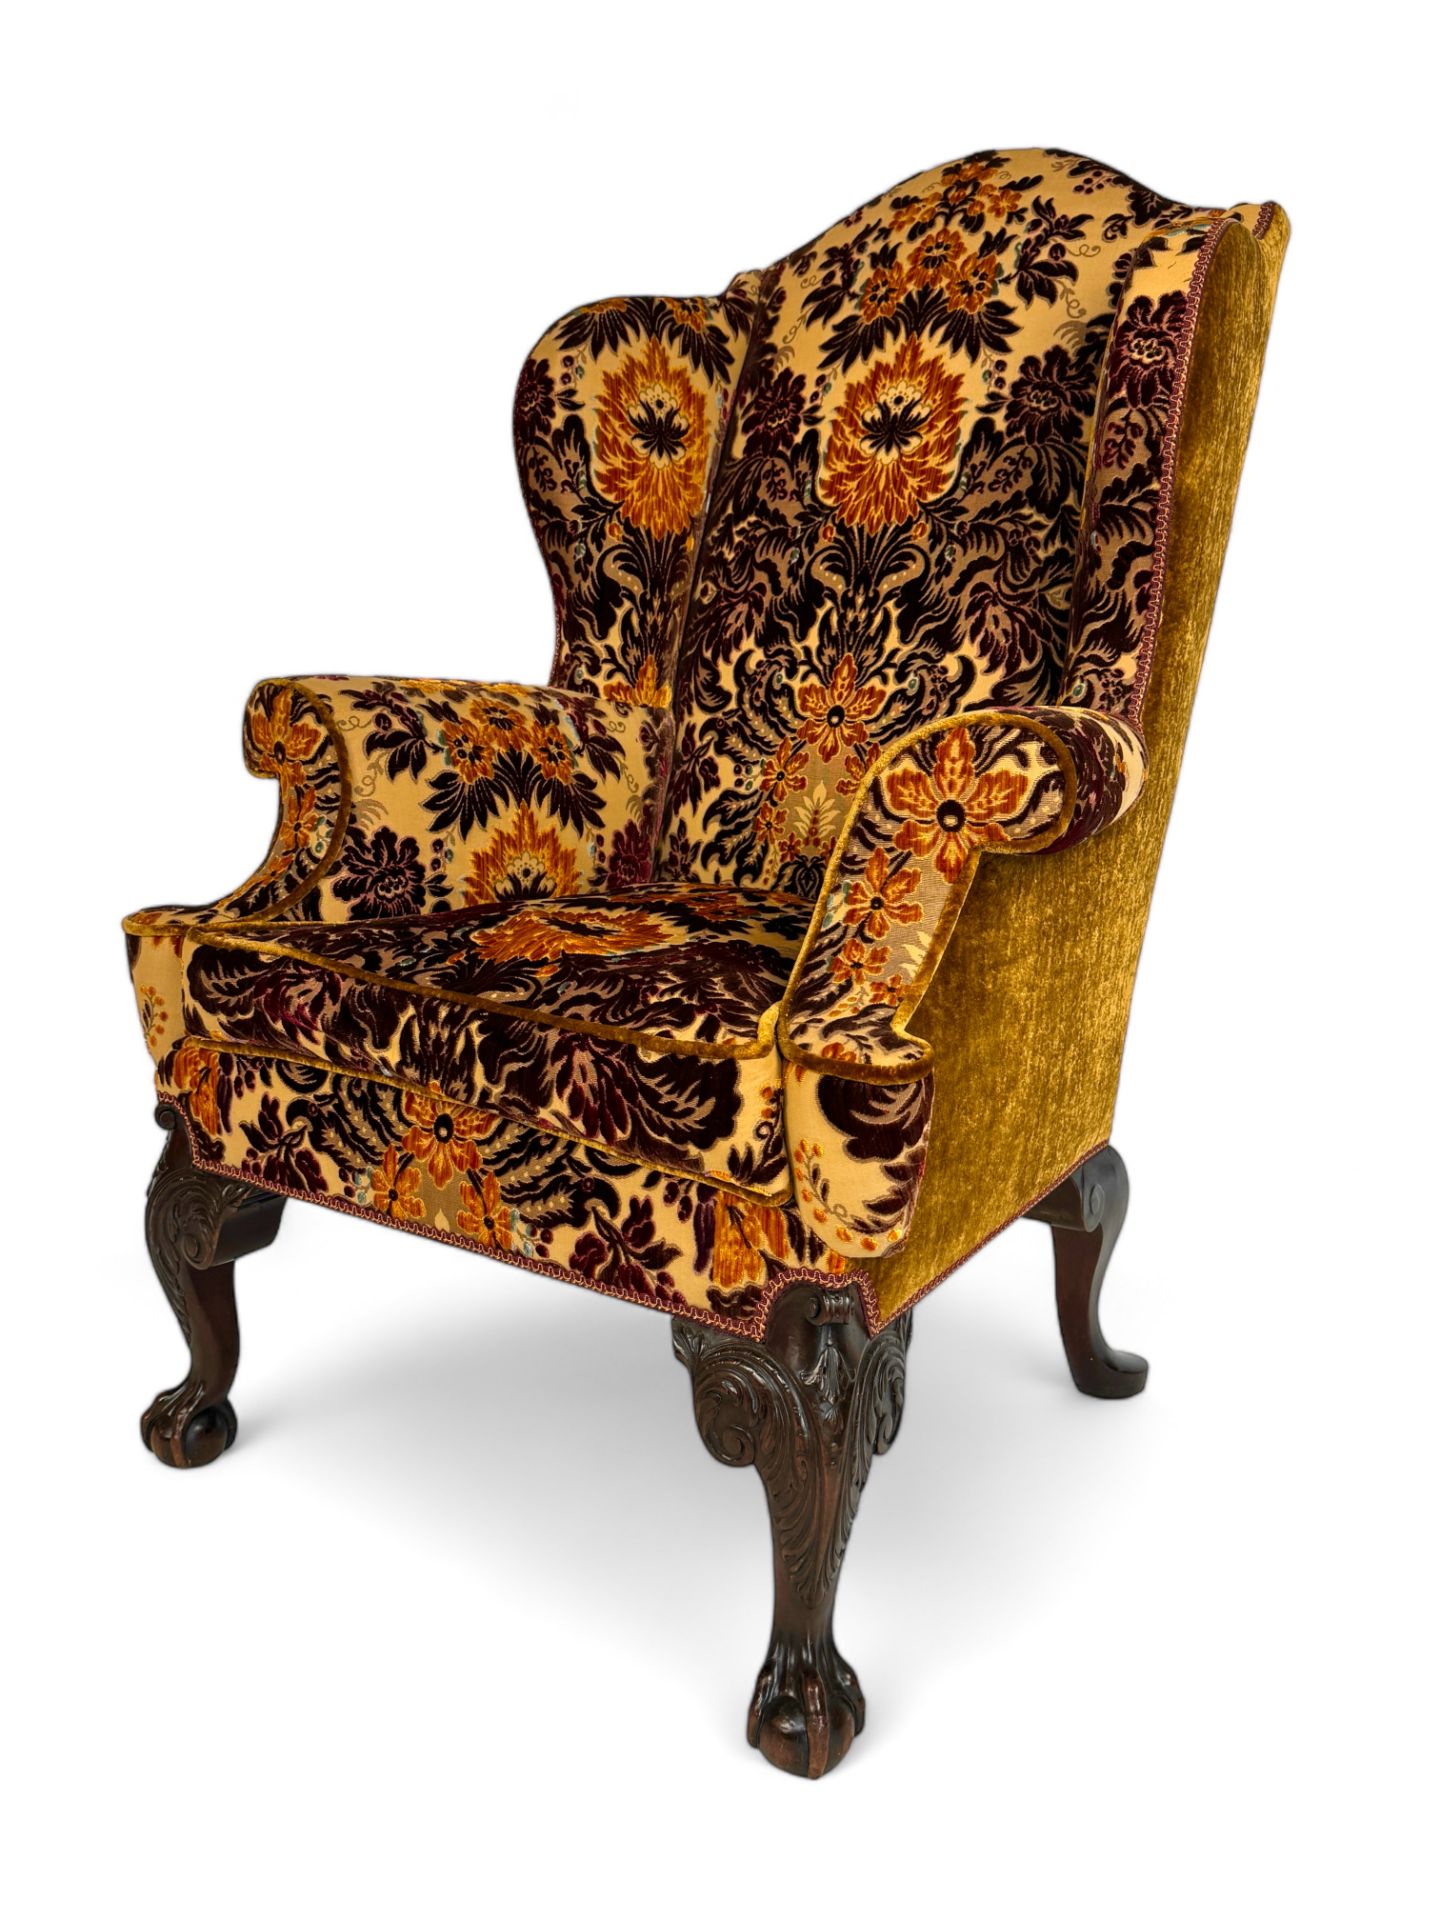 A George II style carved mahogany wing arm chair